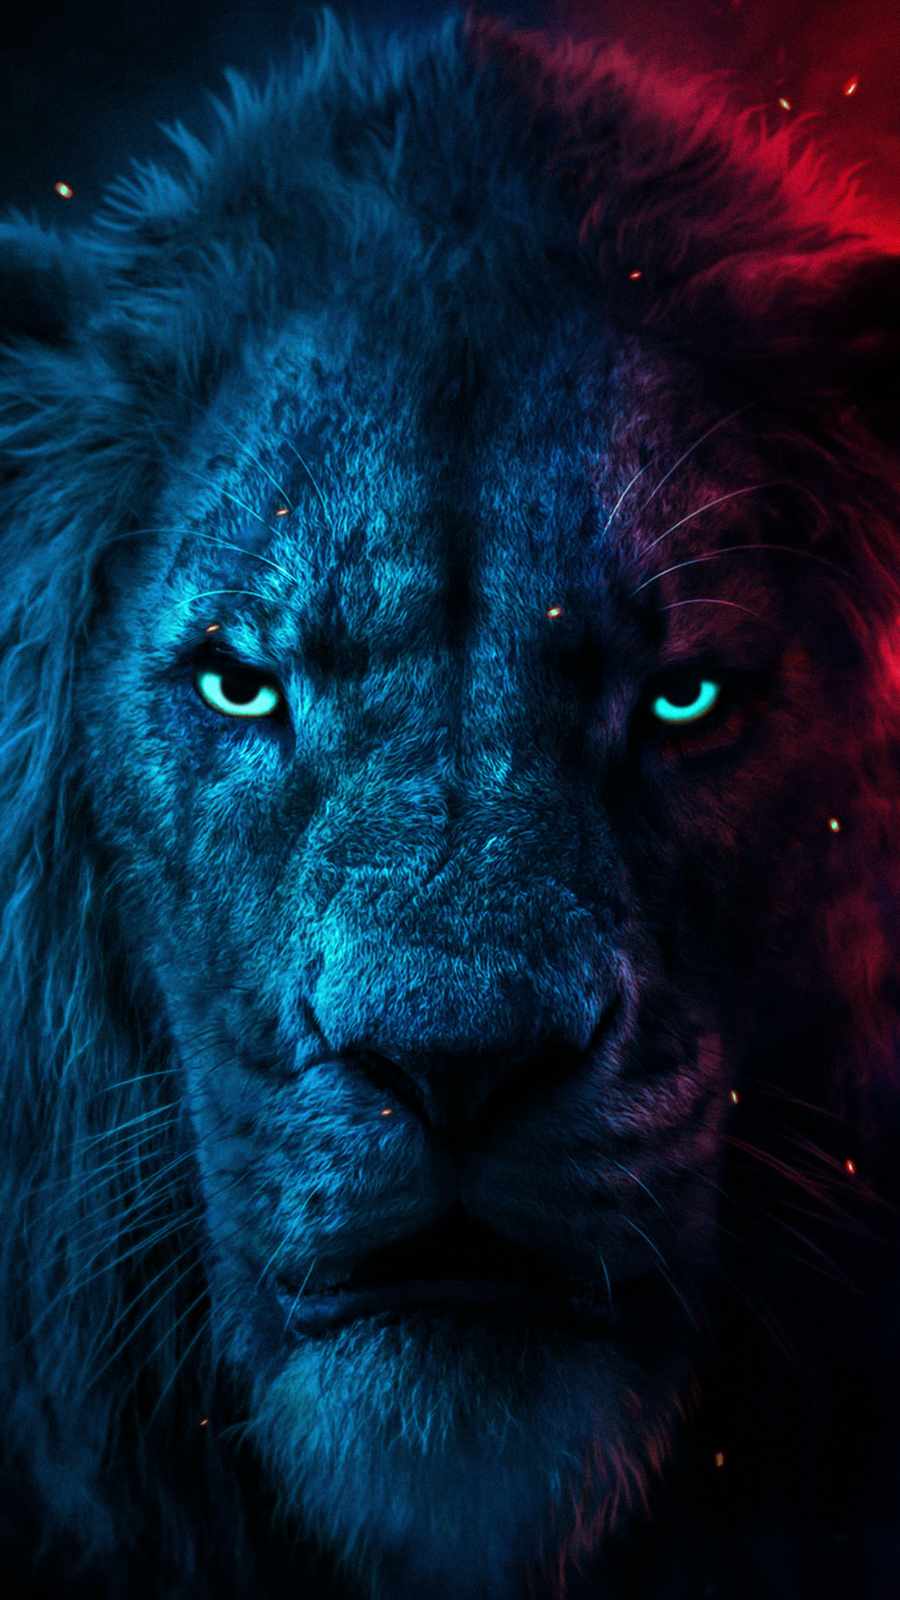 Lion 4K Iphone Wallpapers